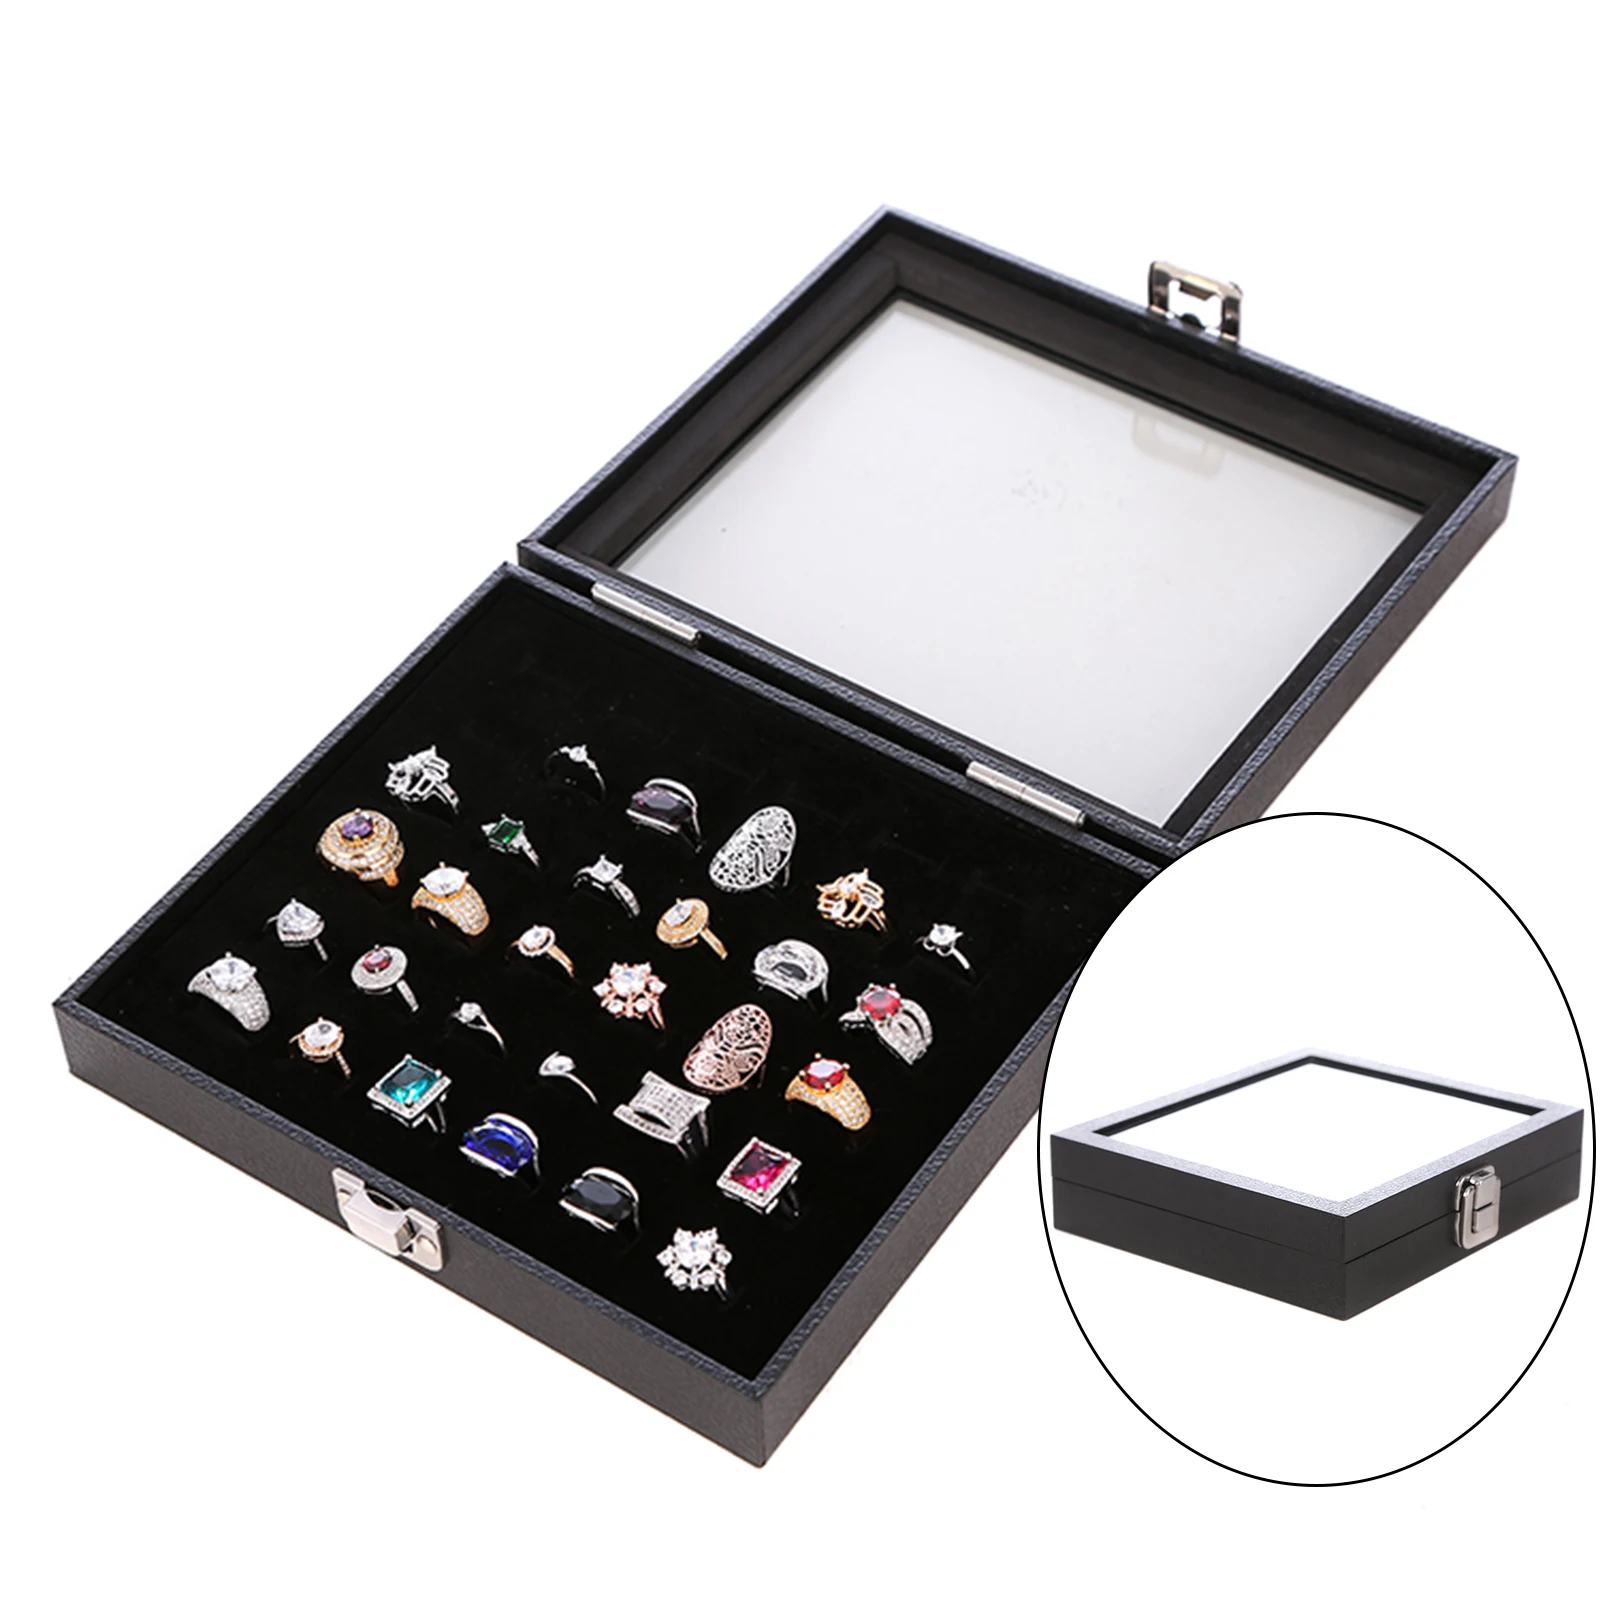 36 Slot Black Rings Display Box Jewelry Storage Case Holder Showcase Rings Cufflink Jewelry Tray With Lid